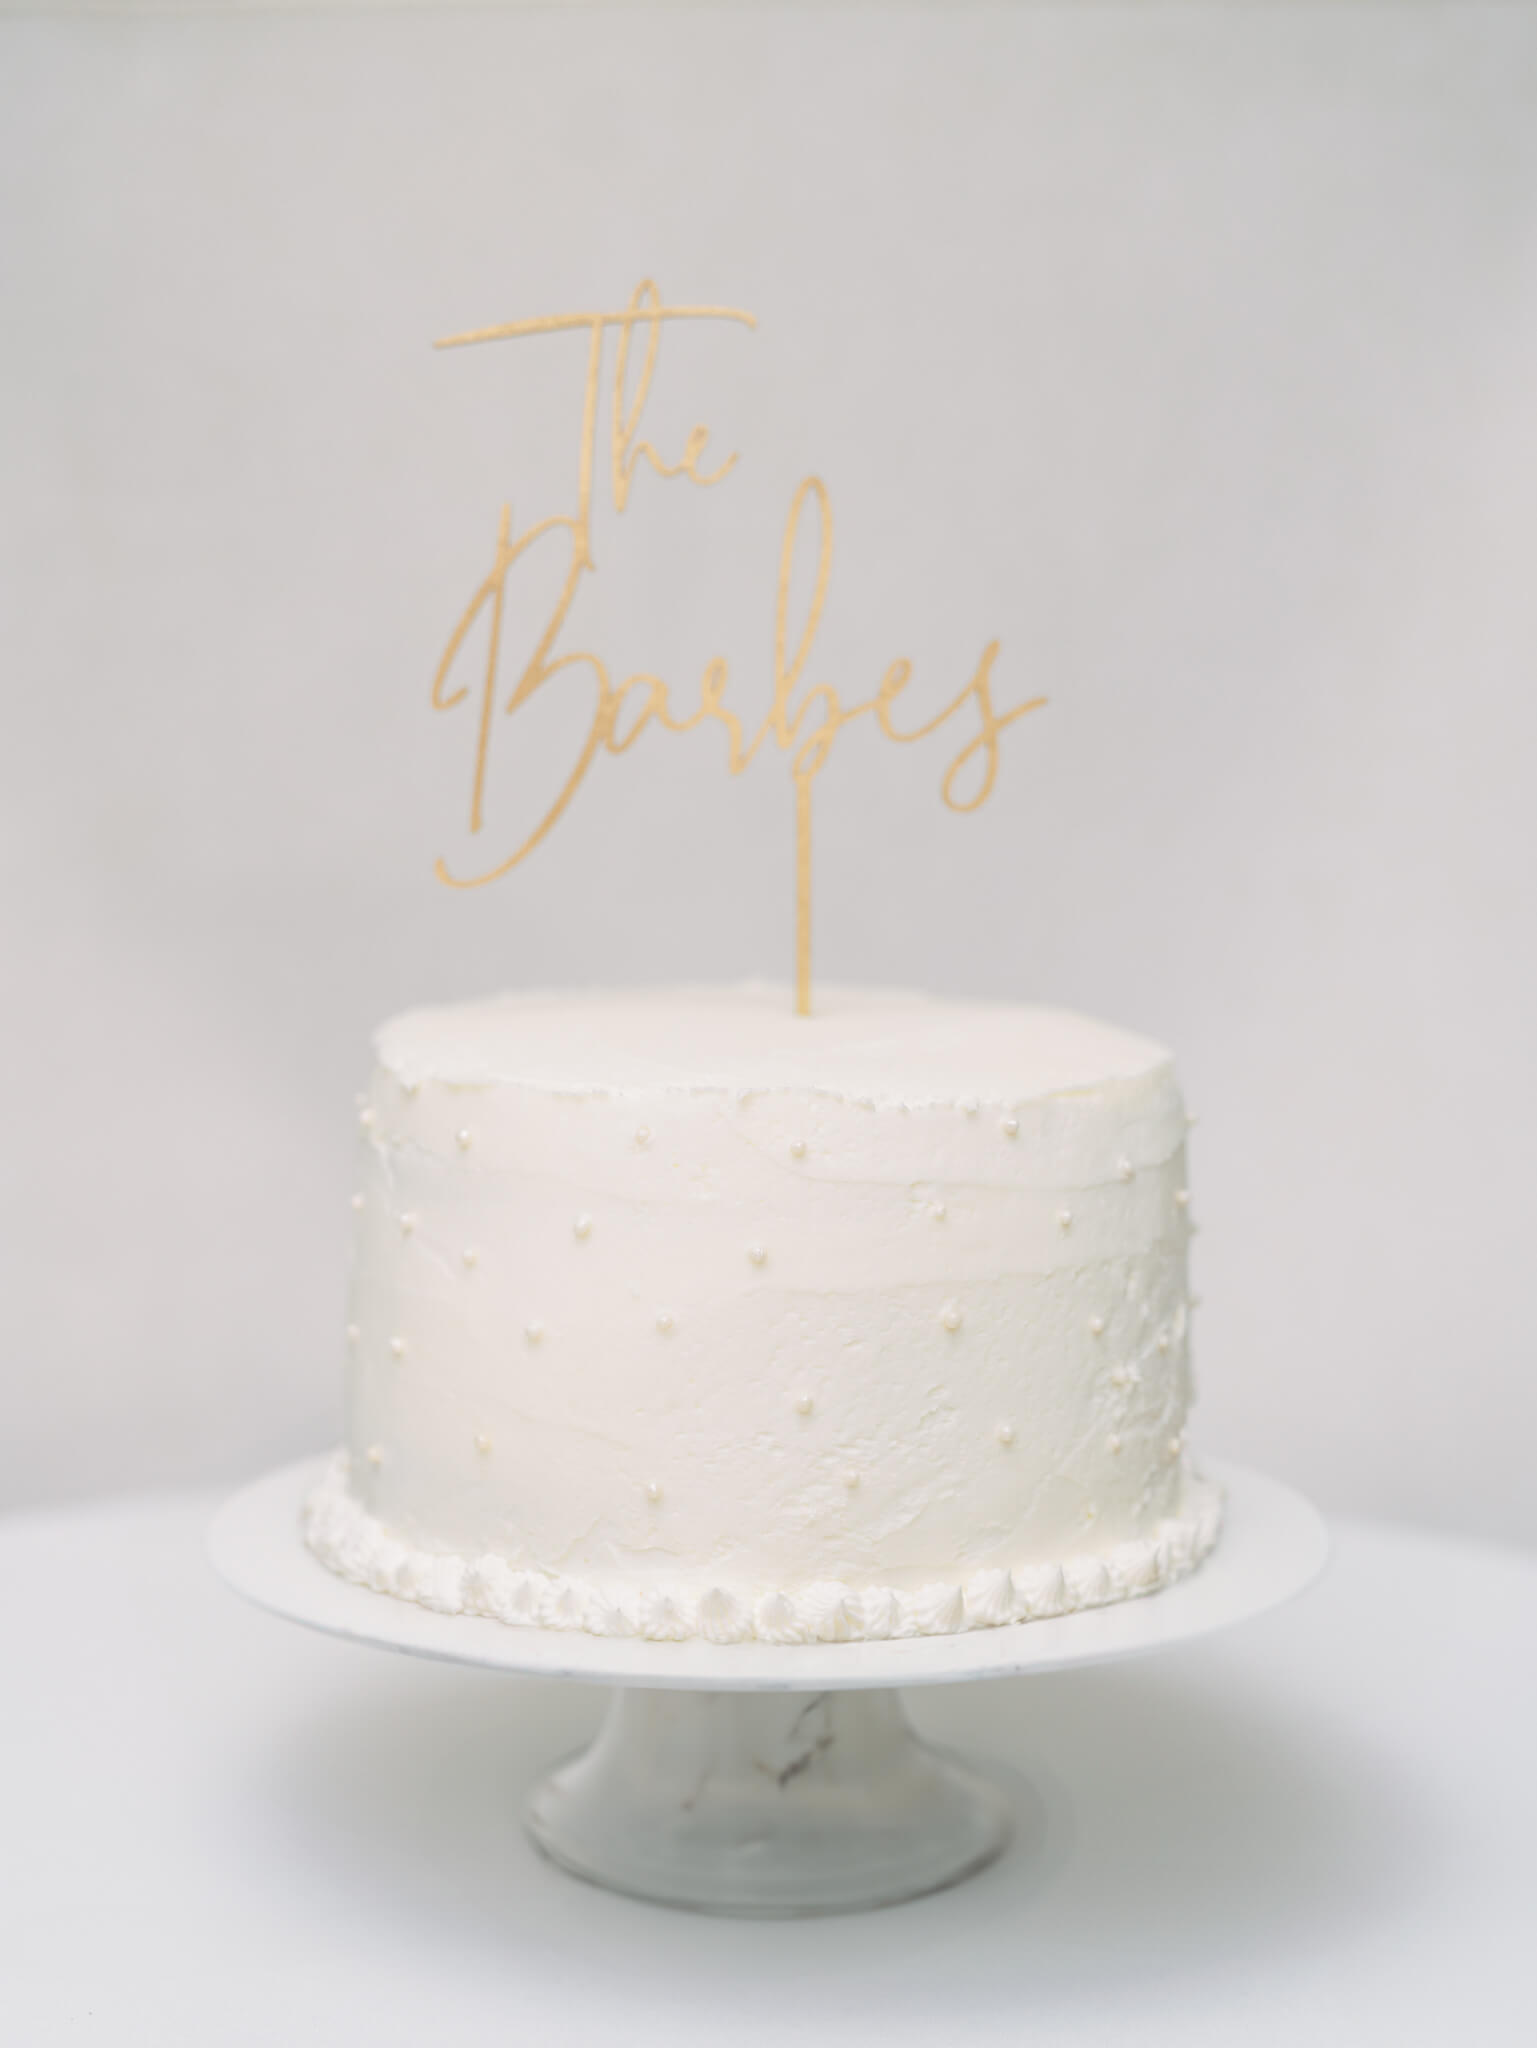 A one tier white wedding cake with pearls on a white marble cake stand with a gold worded topper.